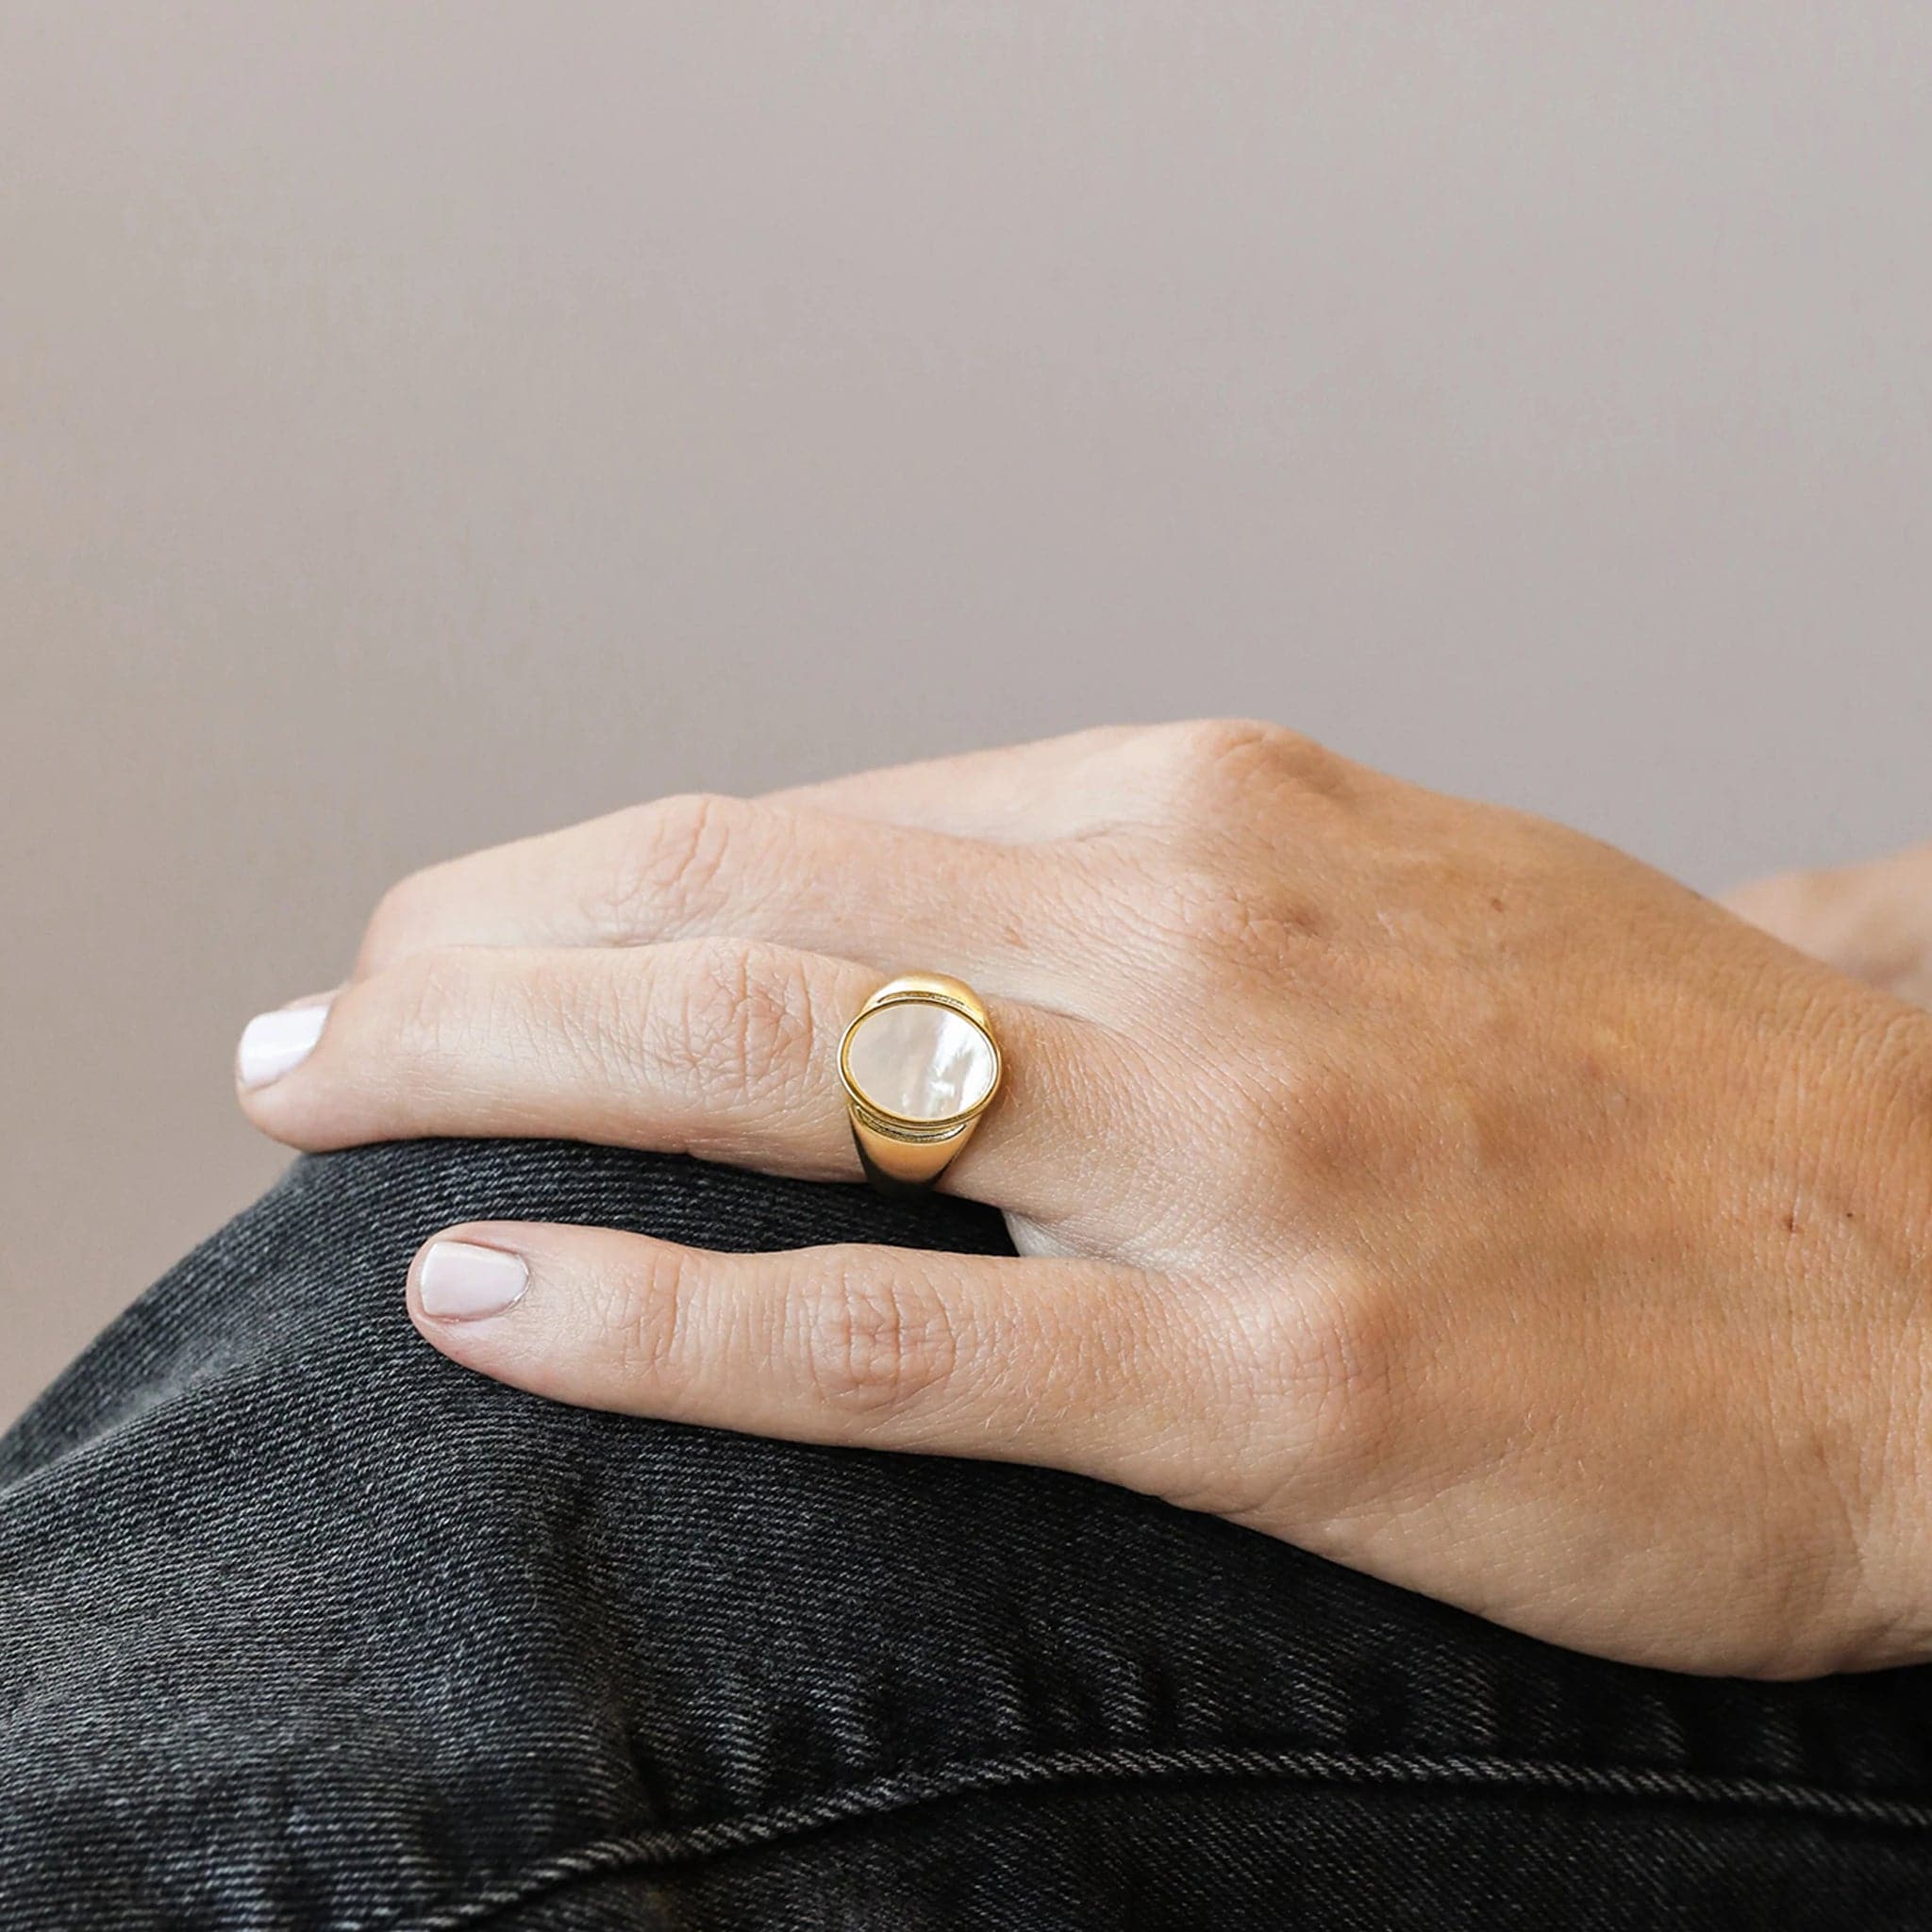 A statement gold signet ring with an oval mother of pearl stone set in the center. Model is wearing it alone.